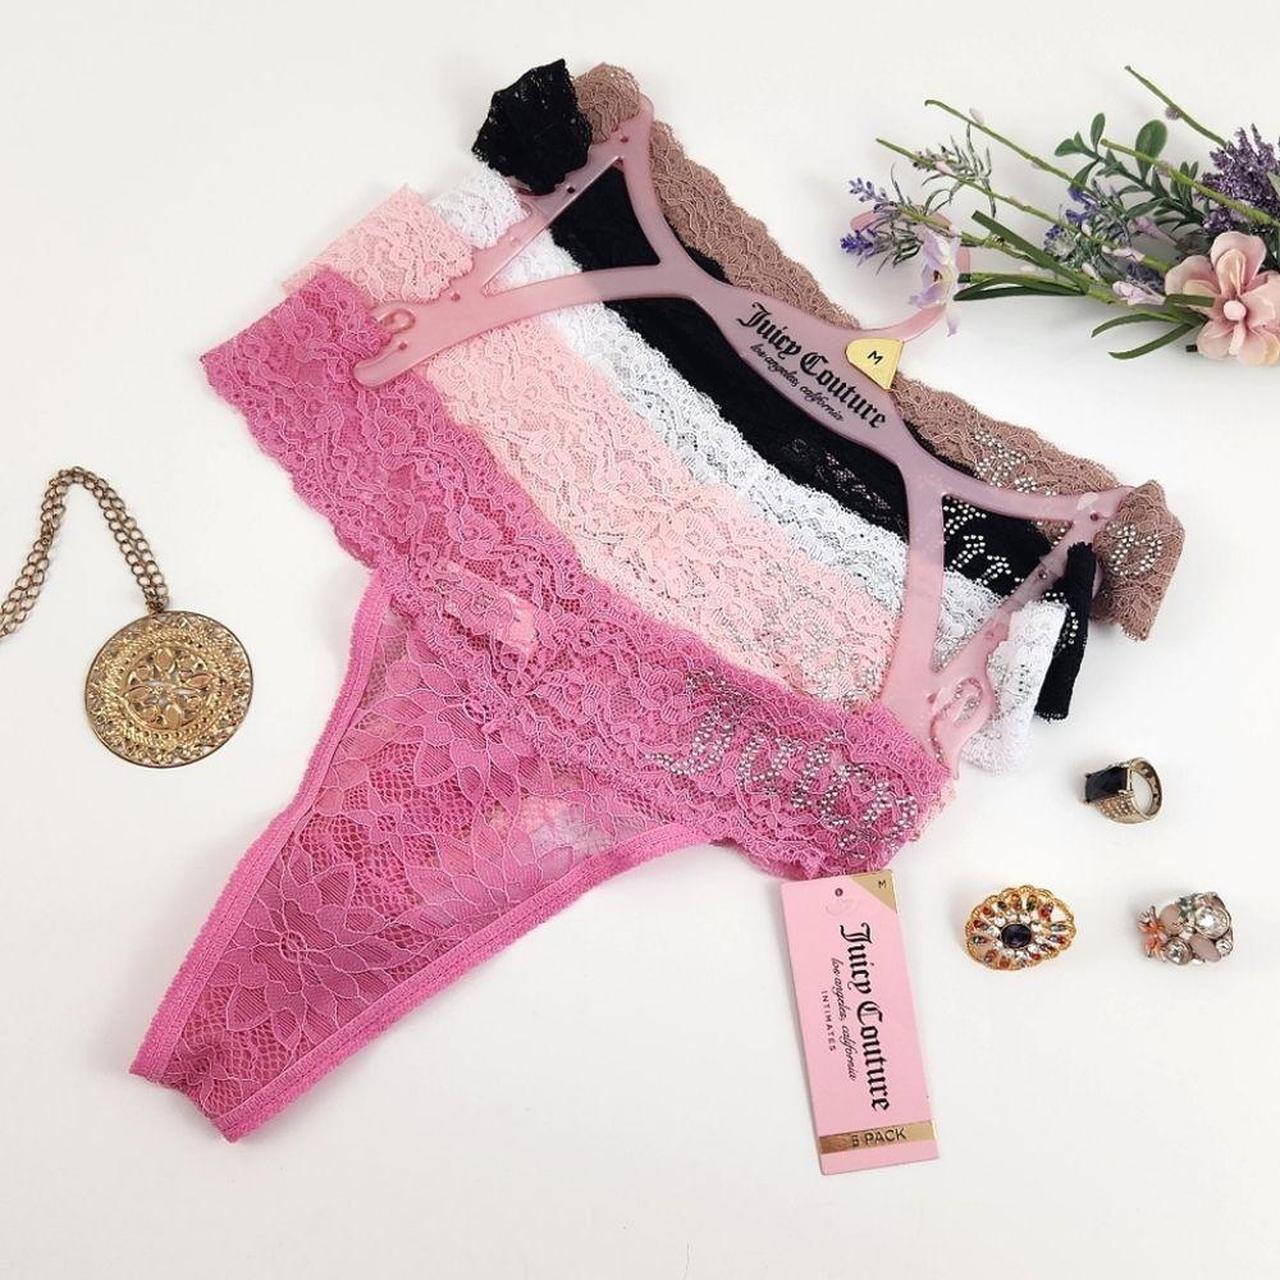 Juicy Couture Lace Thong 5 Pack Cute floral lace - Depop